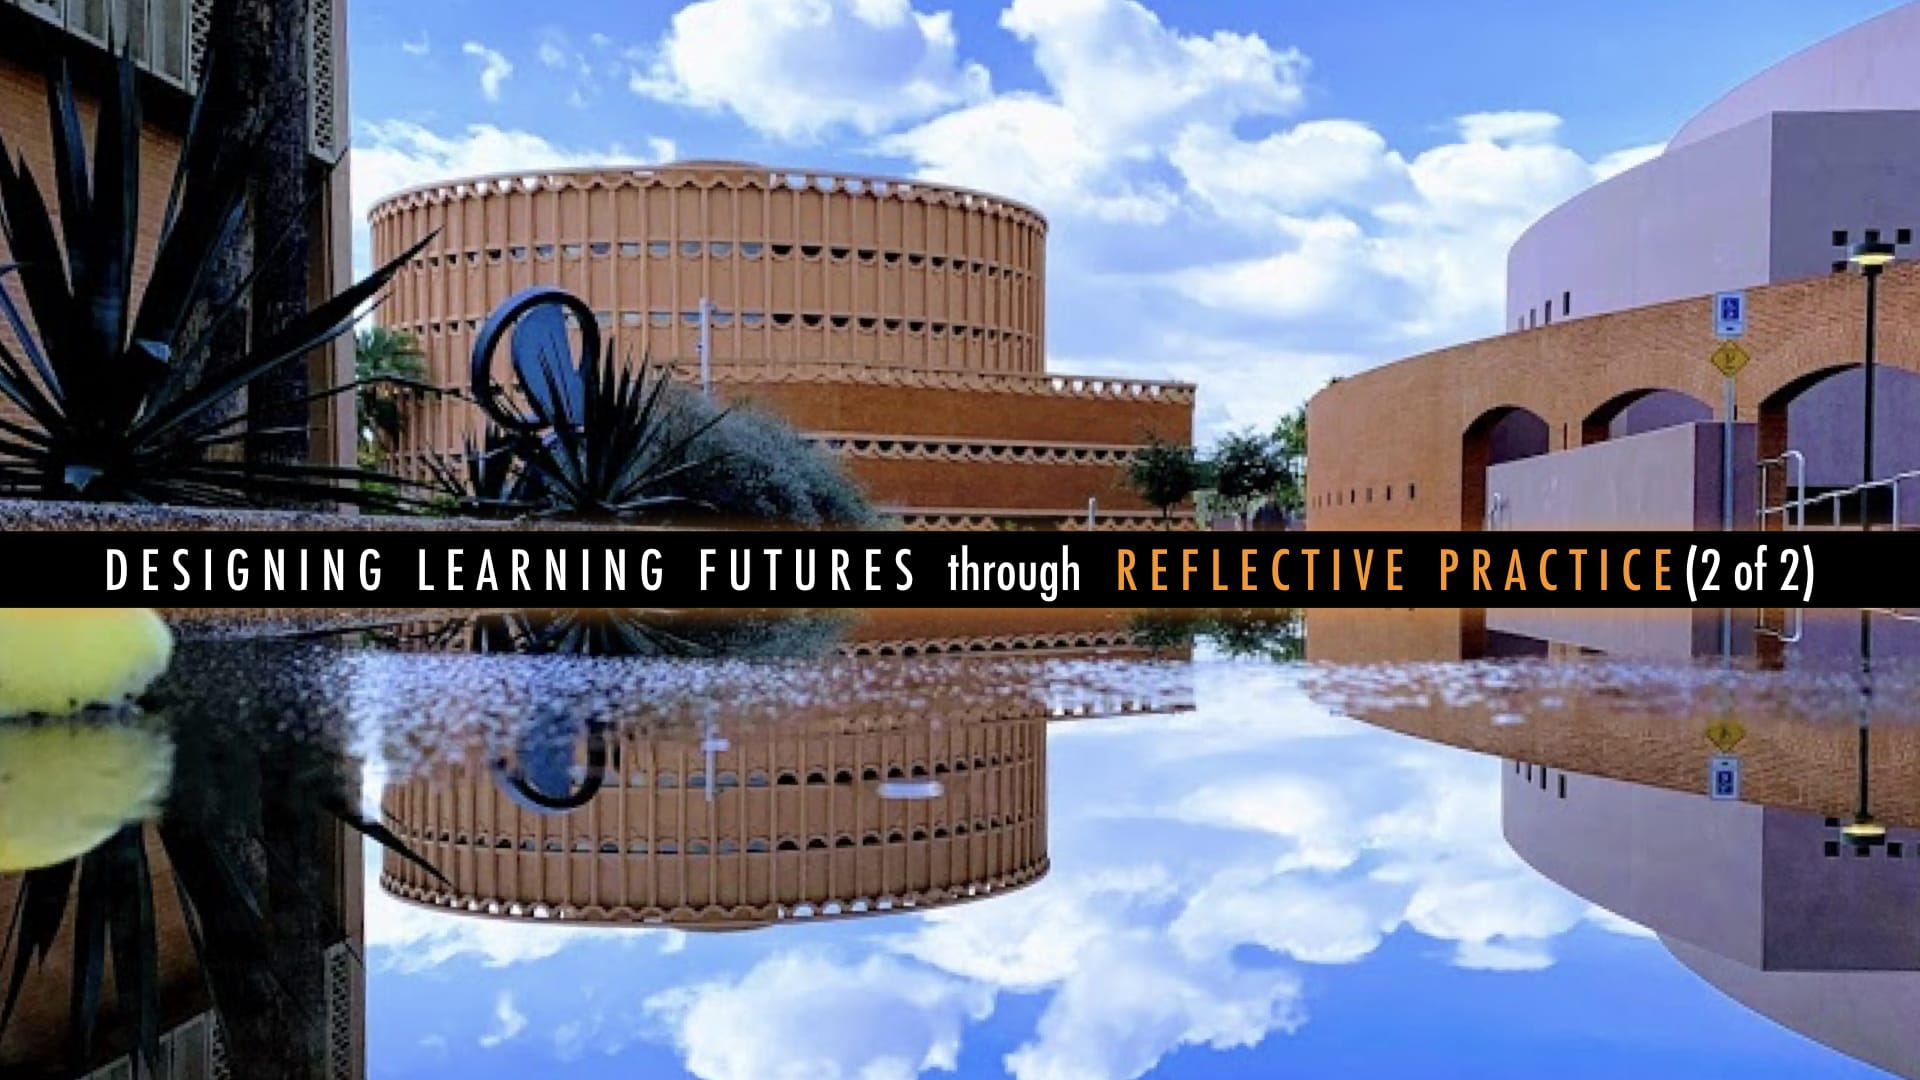 Designing learning futures through reflective practice: 2 of 2